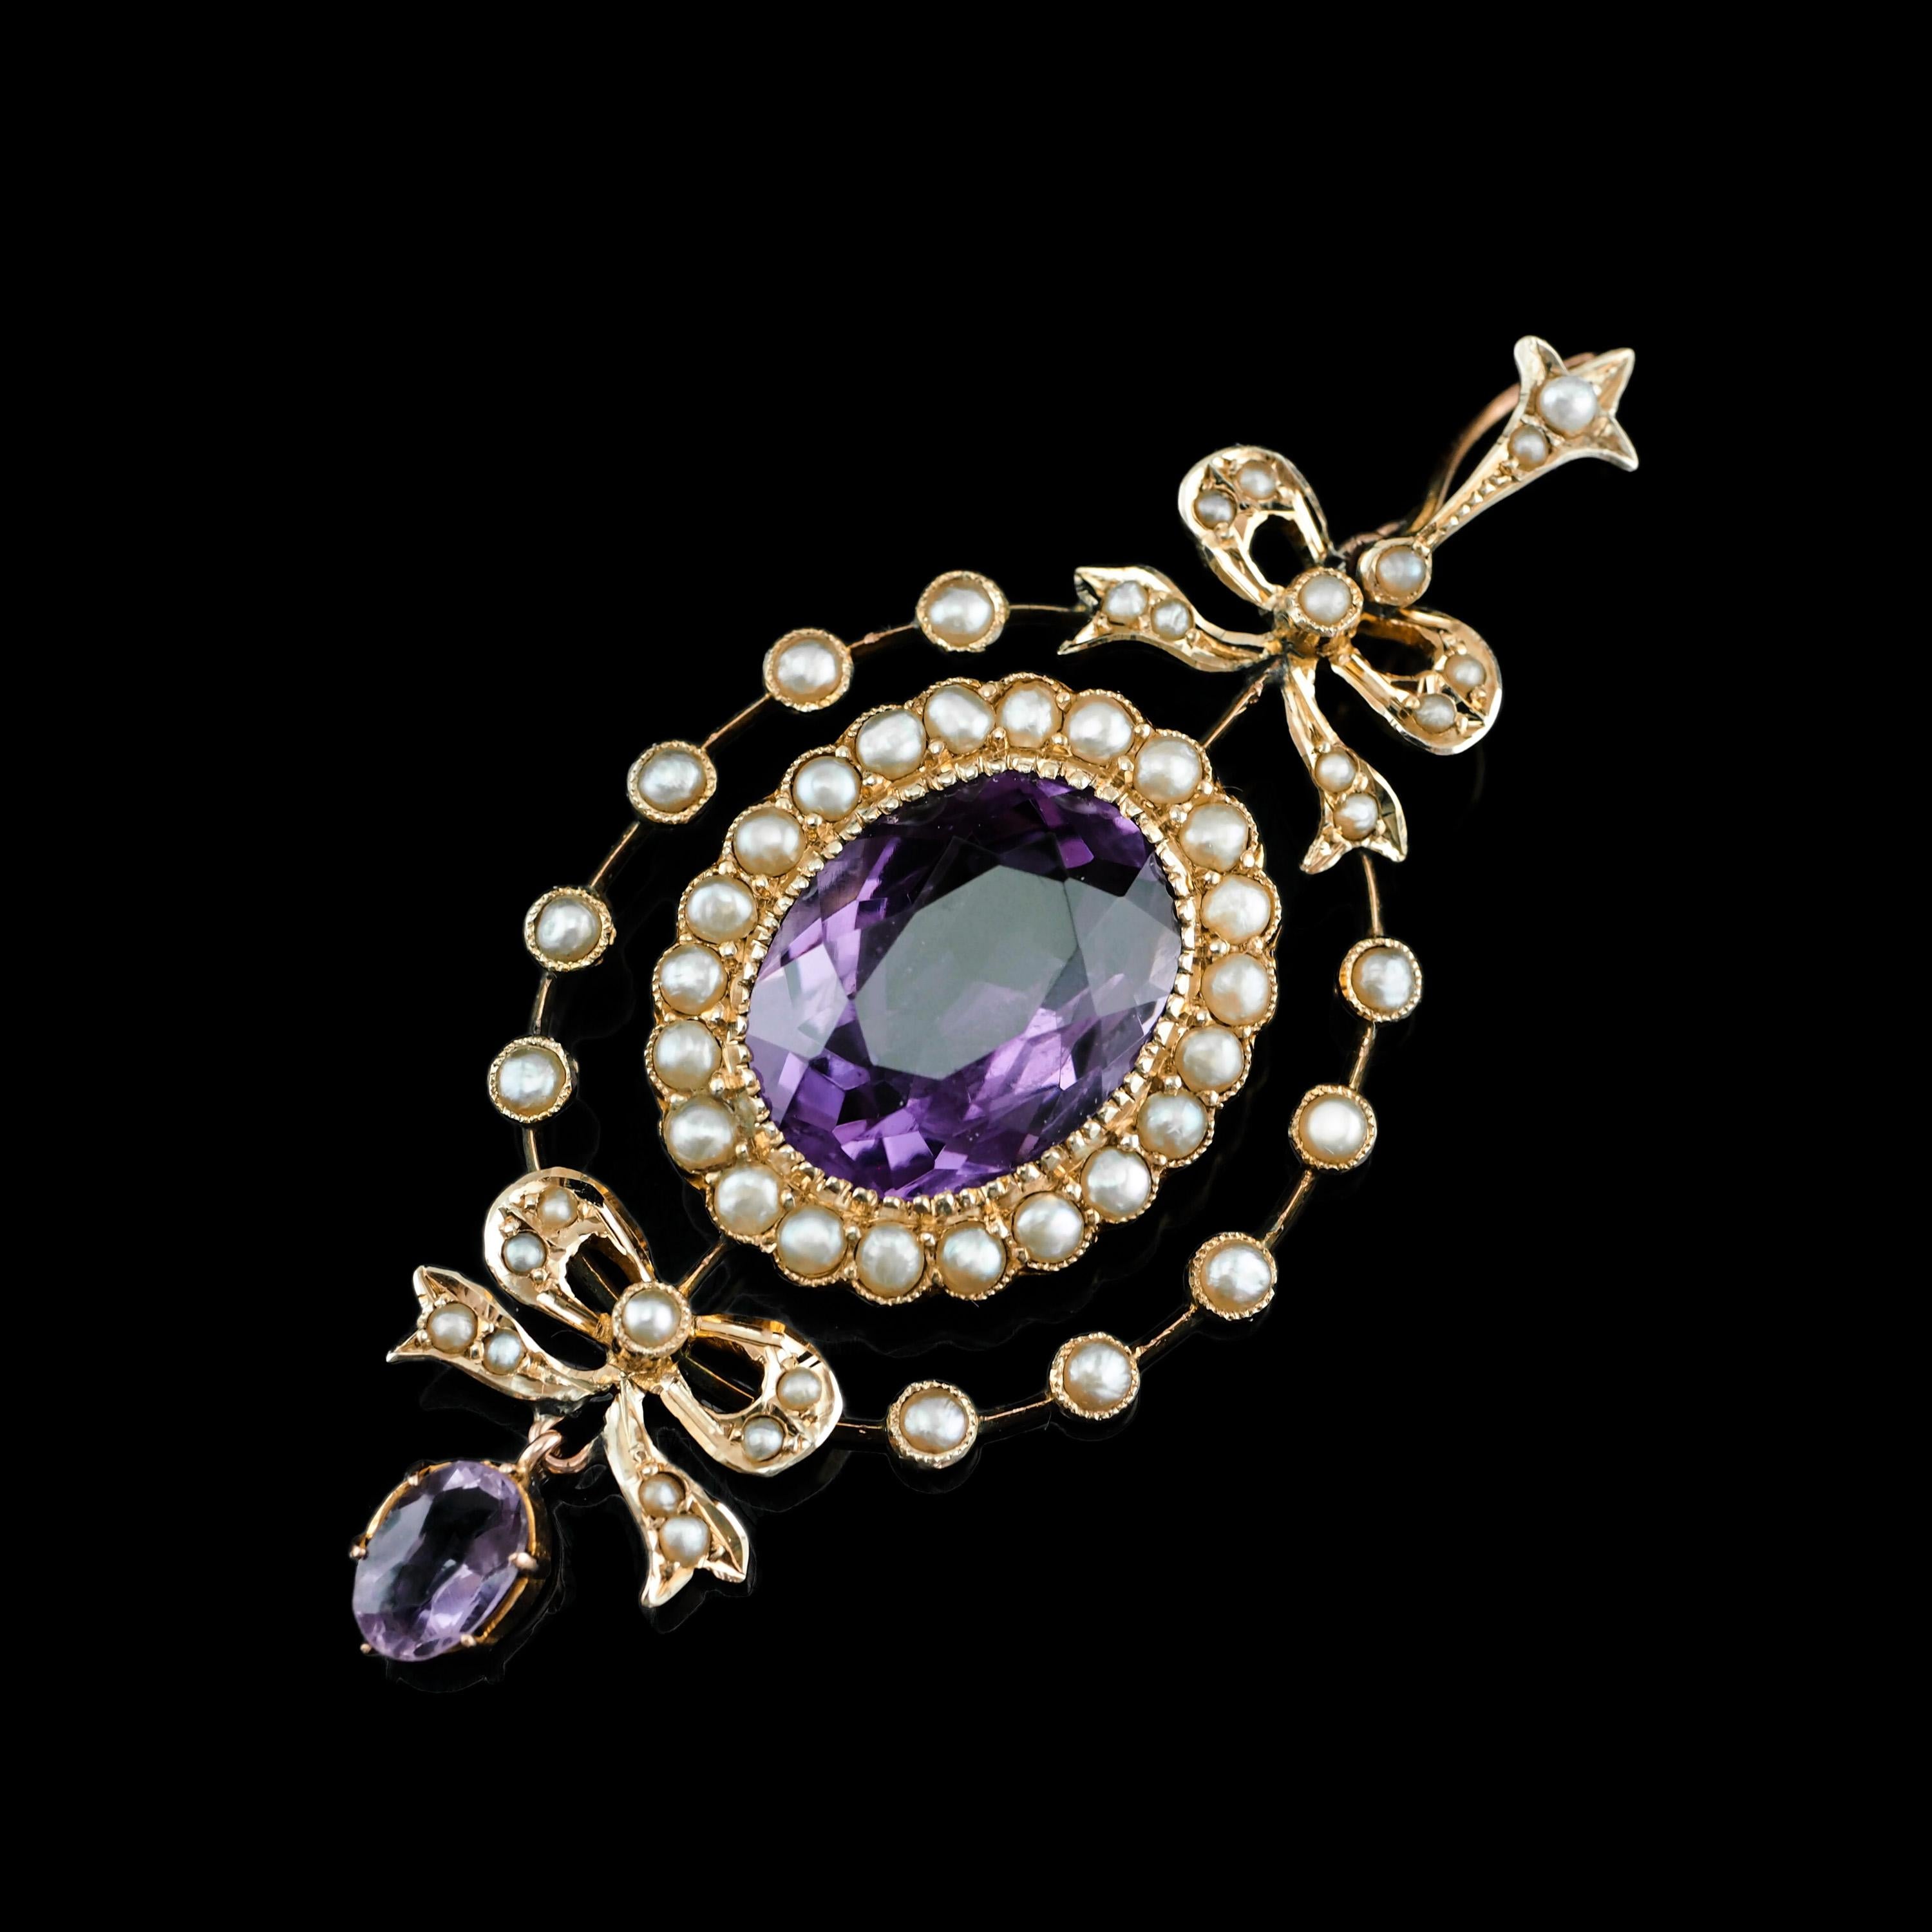 Antique Edwardian Amethyst & Seed Pearl 9k Gold Necklace Pendant, circa 1905 10